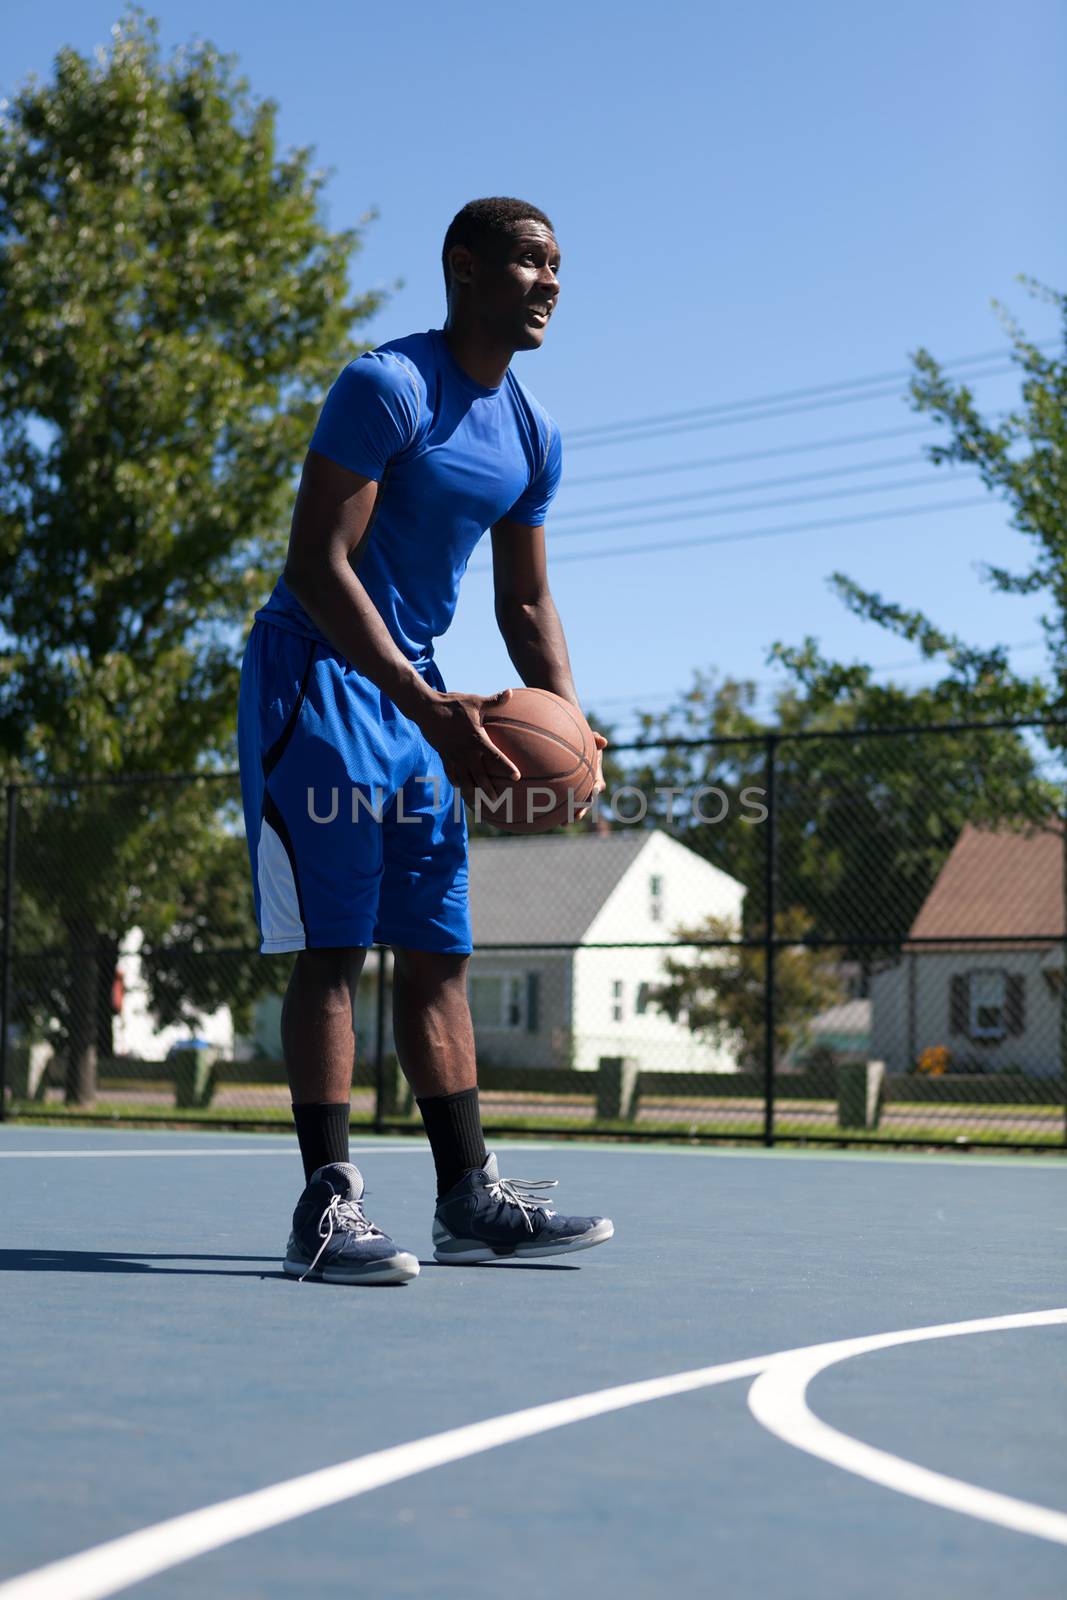 Basketball player shooting the ball at the basket on an outdoor court.